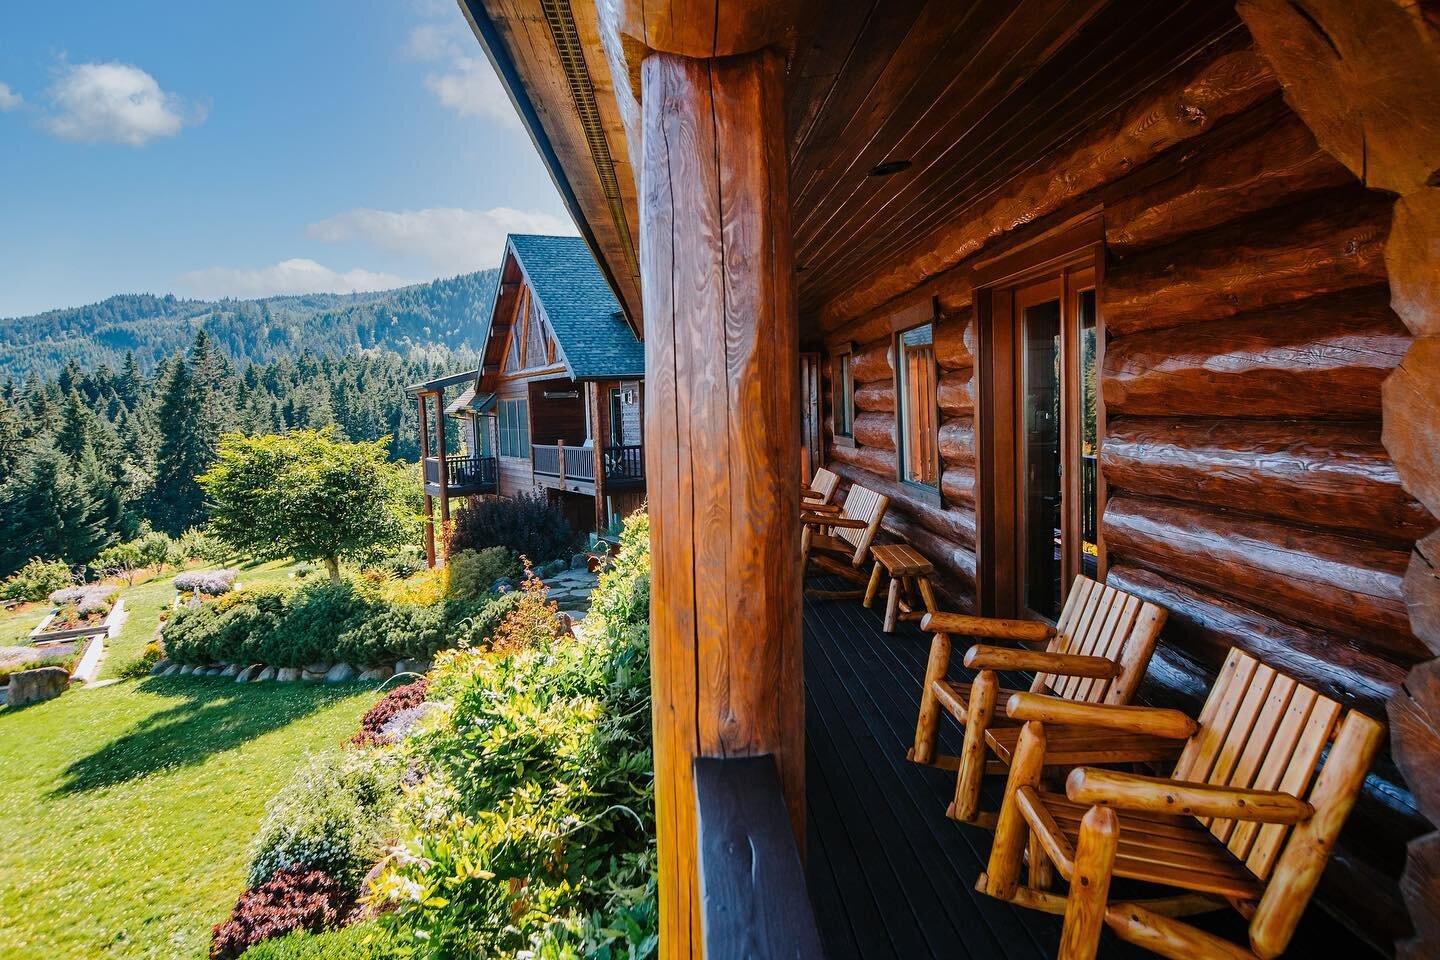 @sakura_ridge a boutique, eco-conscious luxury bed and breakfast in Hood River Oregon is officially reopen for the season, now taking reservations through October.
.
.
New this season, Sakura is thrilled to welcome chef Lia Lira, a Top Chef alum and 